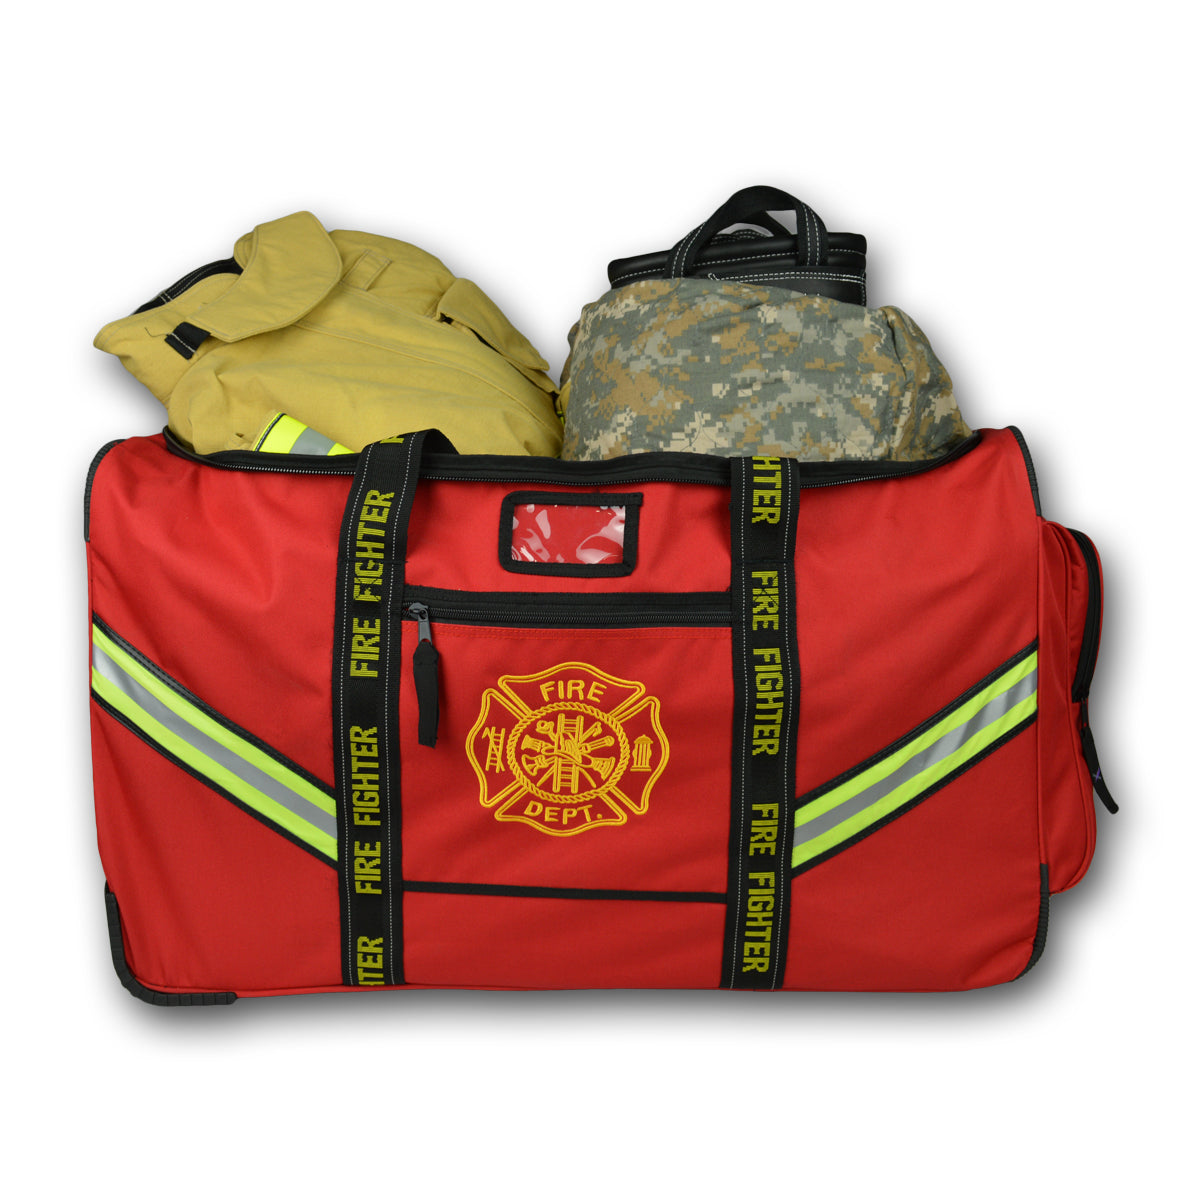 Lightning X Premium Rolling Gear Bag (LXFB60) | The Fire Center | The Fire Store | Store | FREE SHIPPING | Built like no other, a truly unique design! Originally made for the National Guard Firefighters, years of input and development went into this bag and the result is a wheeled fire gear bag that is virtually indestructible. Maybe the luggage companies should take note!